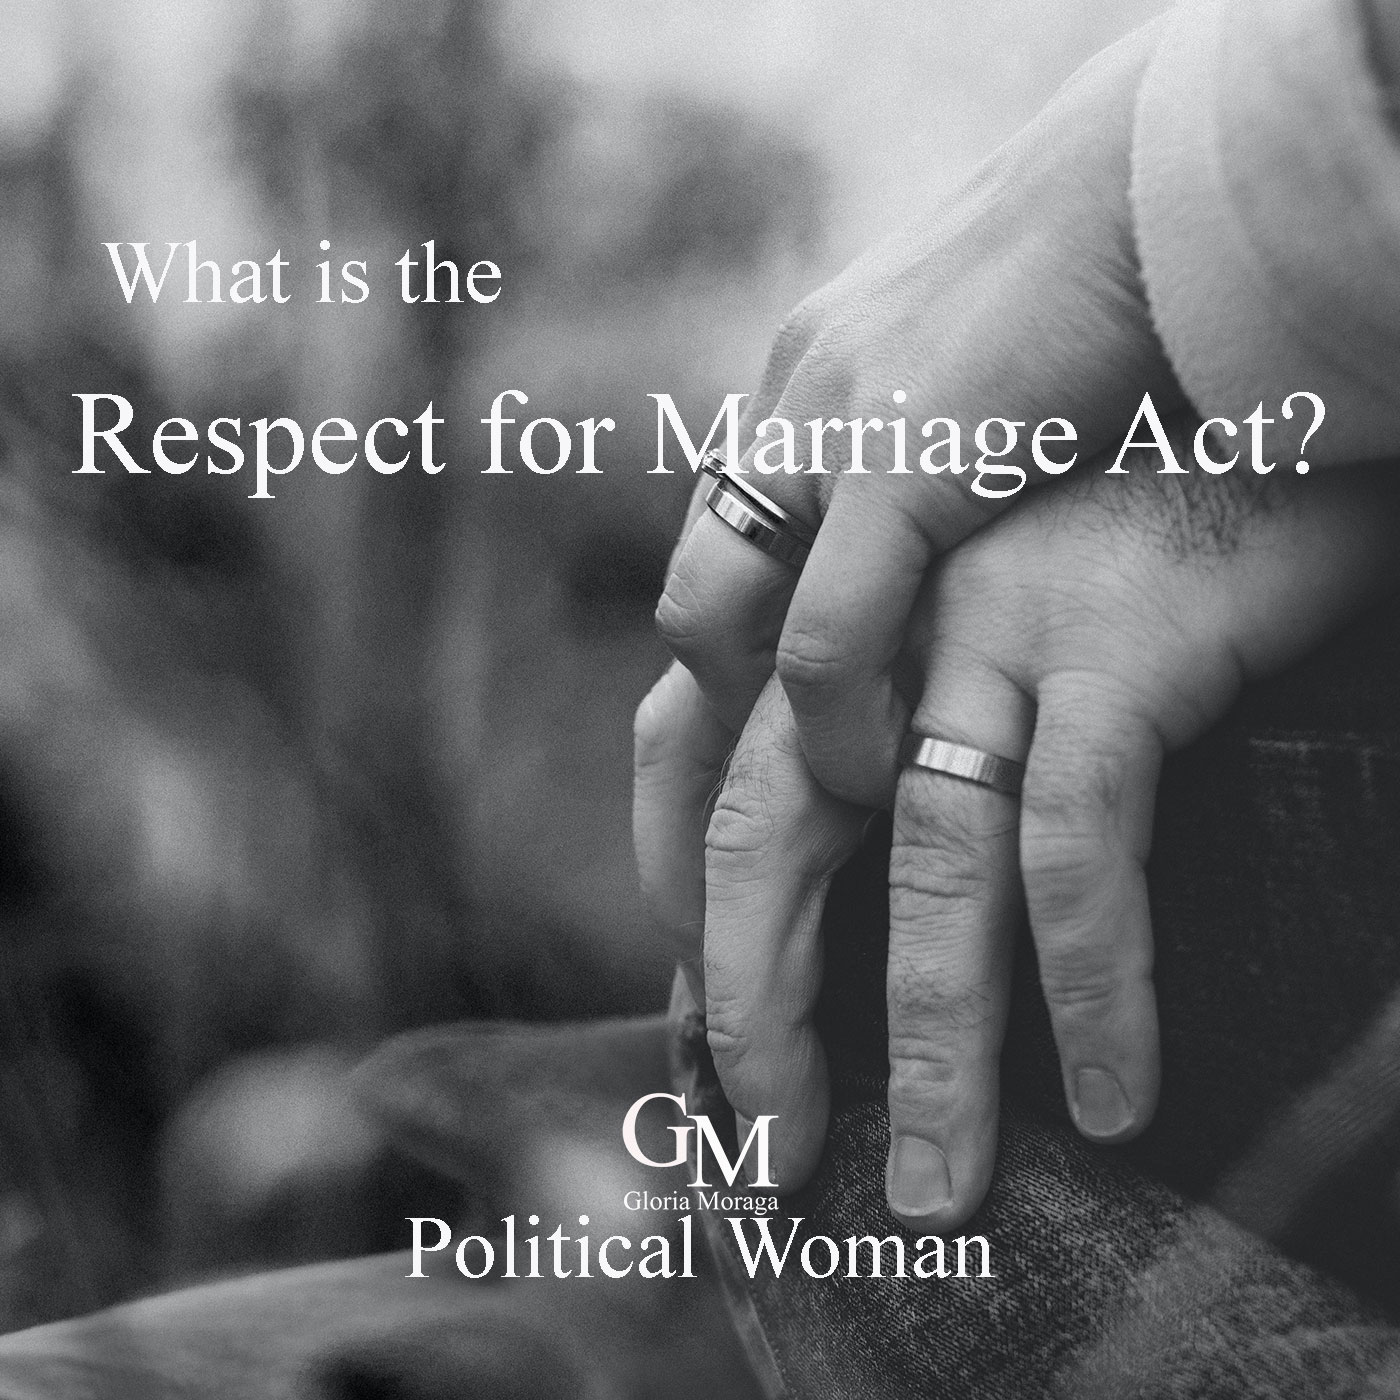 What is the Respect for Marriage Act